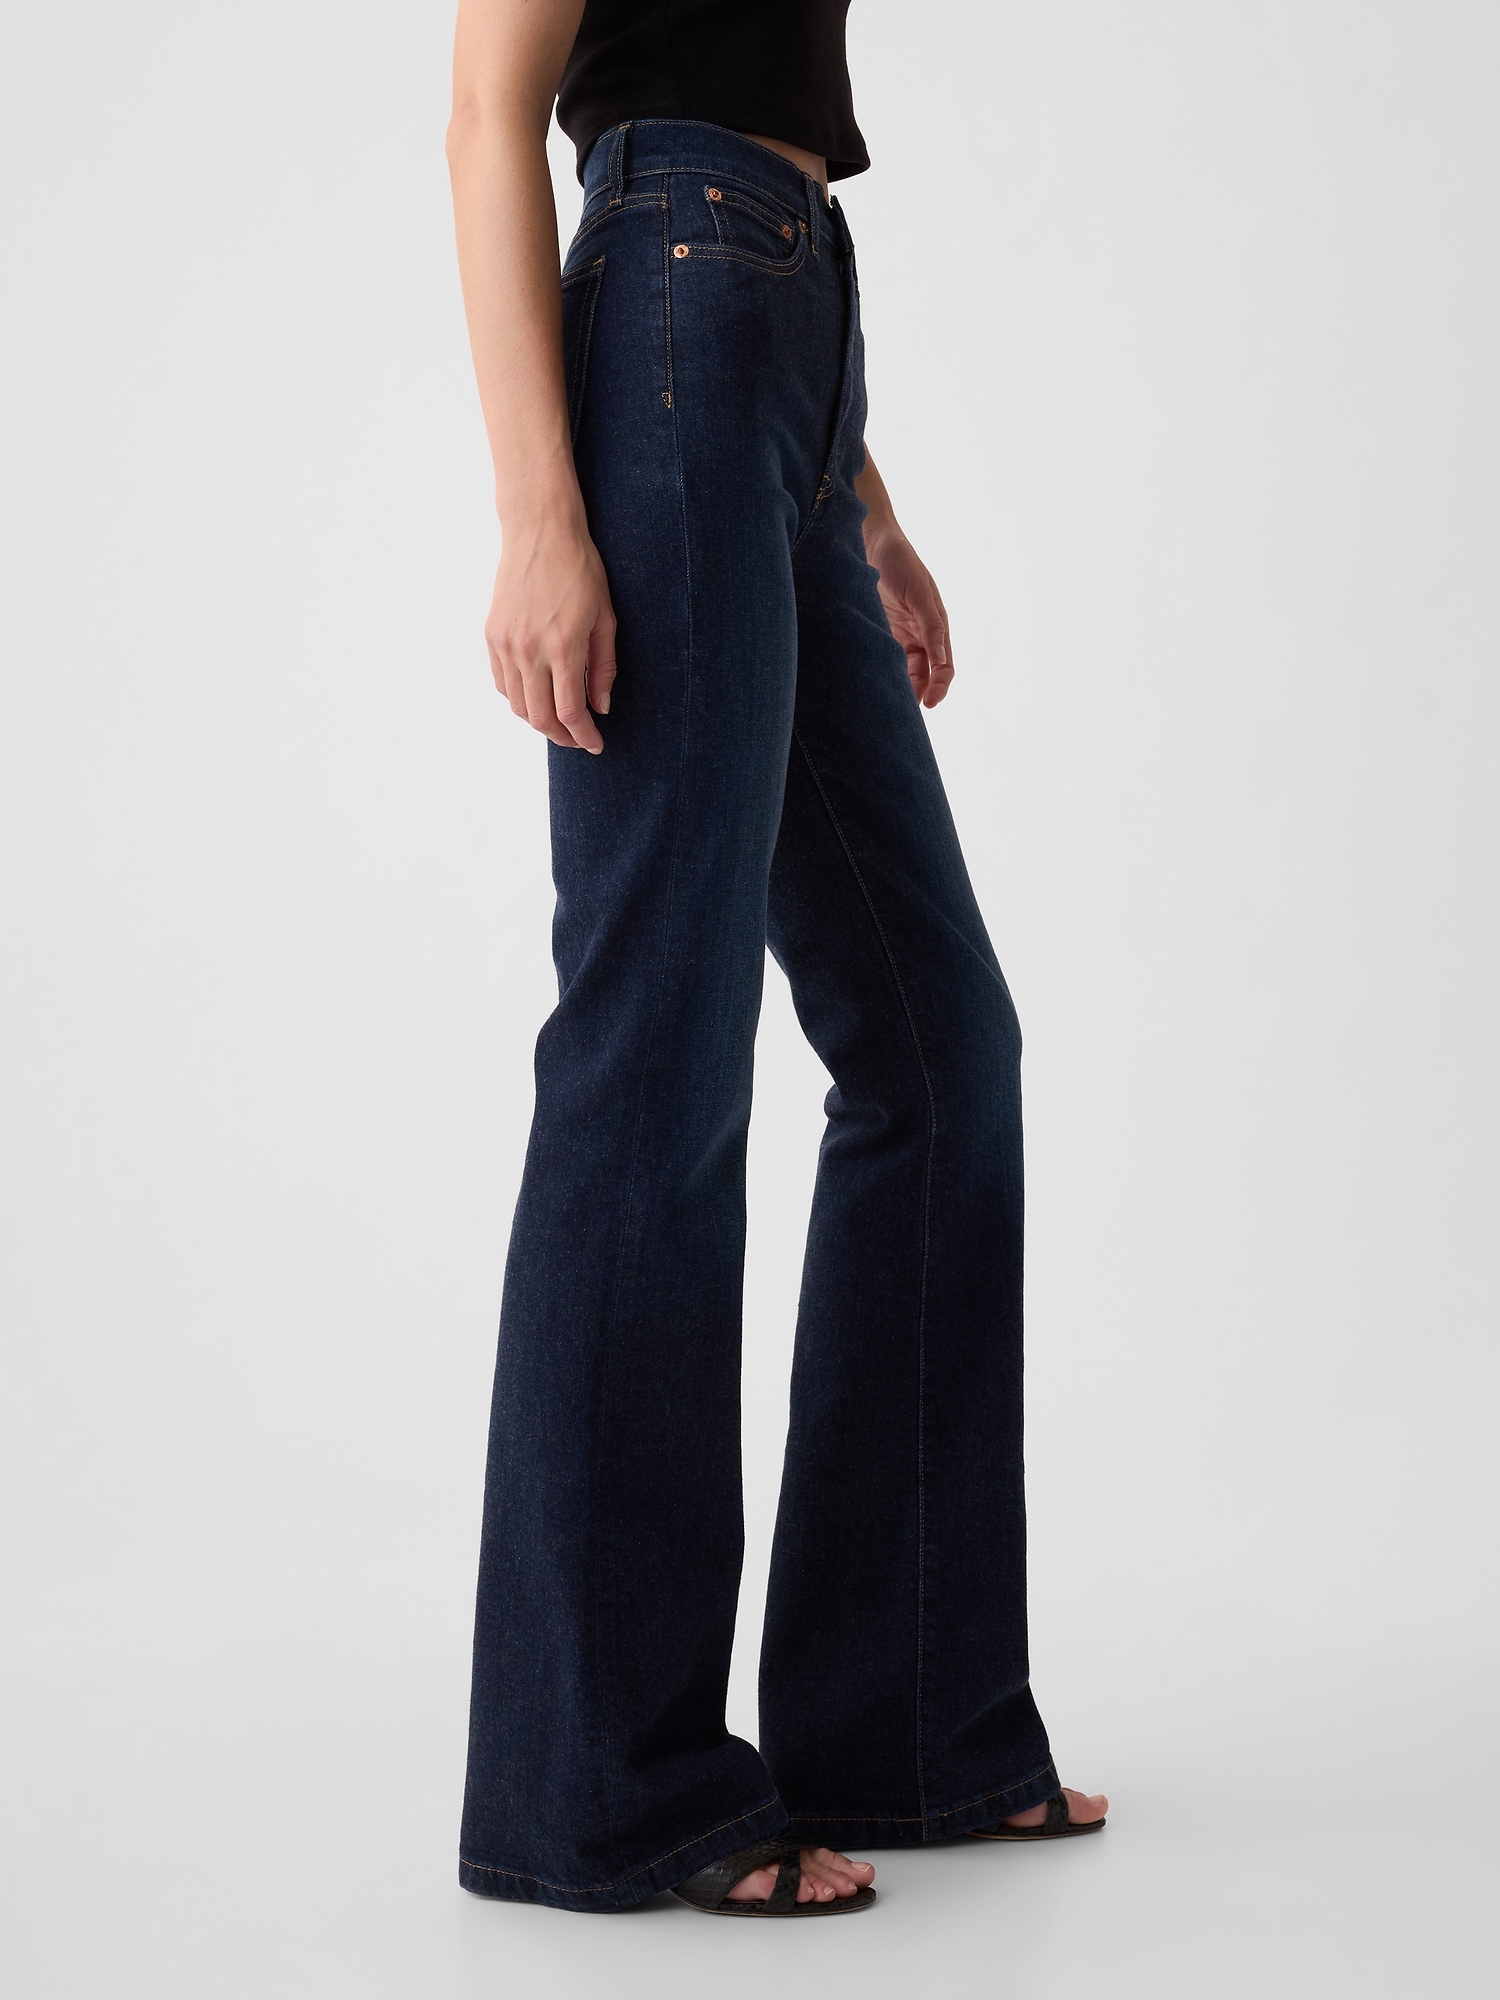 Women's High Waisted Flared Bell Bottoms Jeans/vintage 70s Style